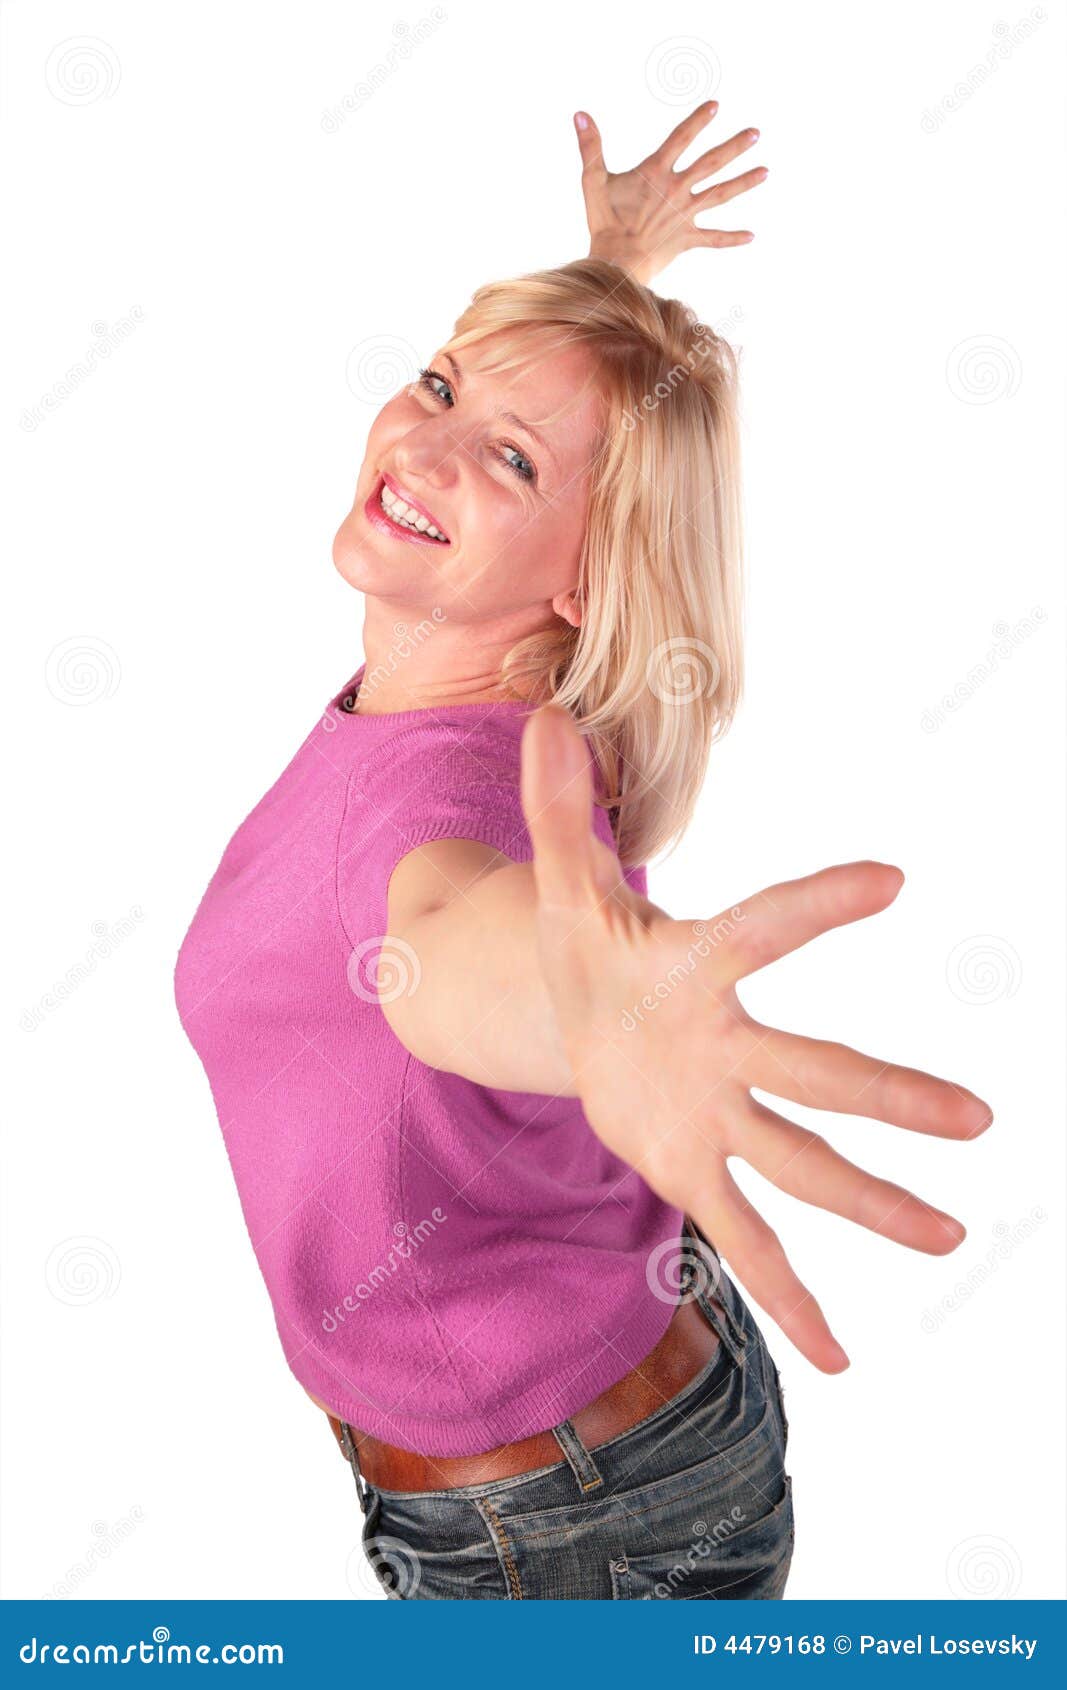 middleaged woman stands dancing 2